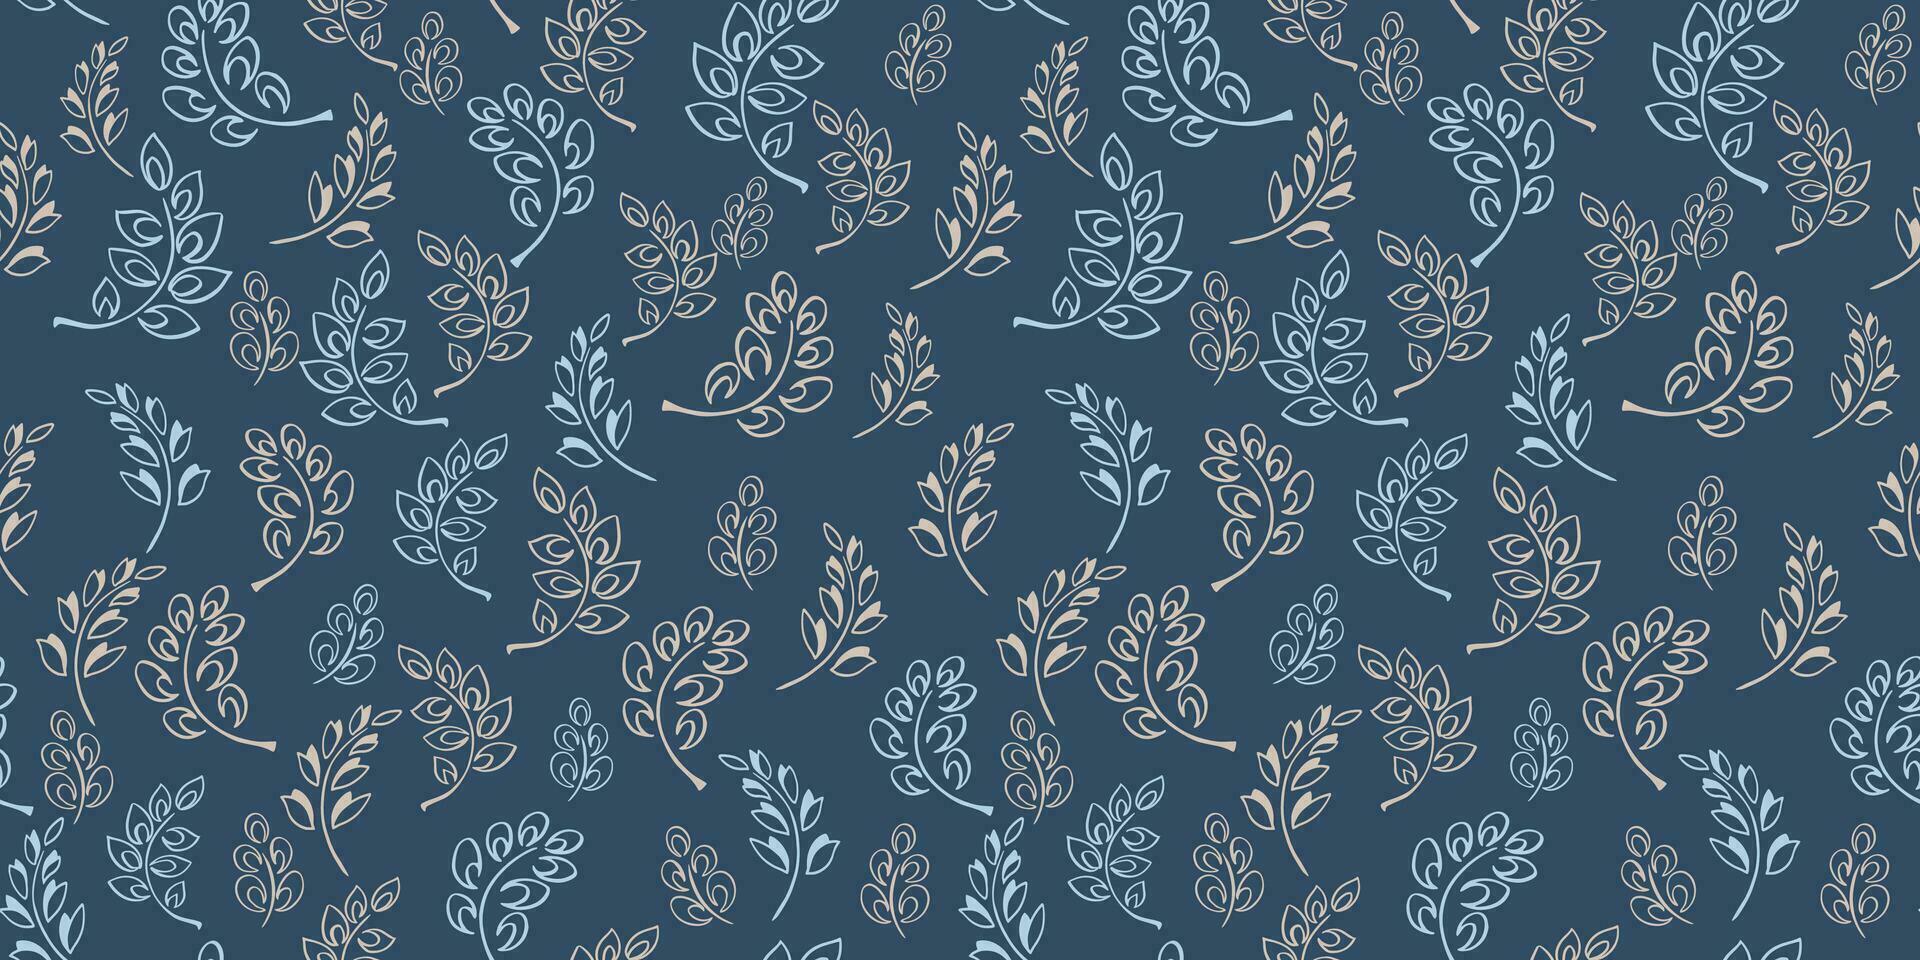 Seamless creative tiny simple branches leaves, drops, lines pattern. Vector hand drawn sketch. Abstract stylized textured floral print. Cute shape organic leaf stems dark turquoise background.